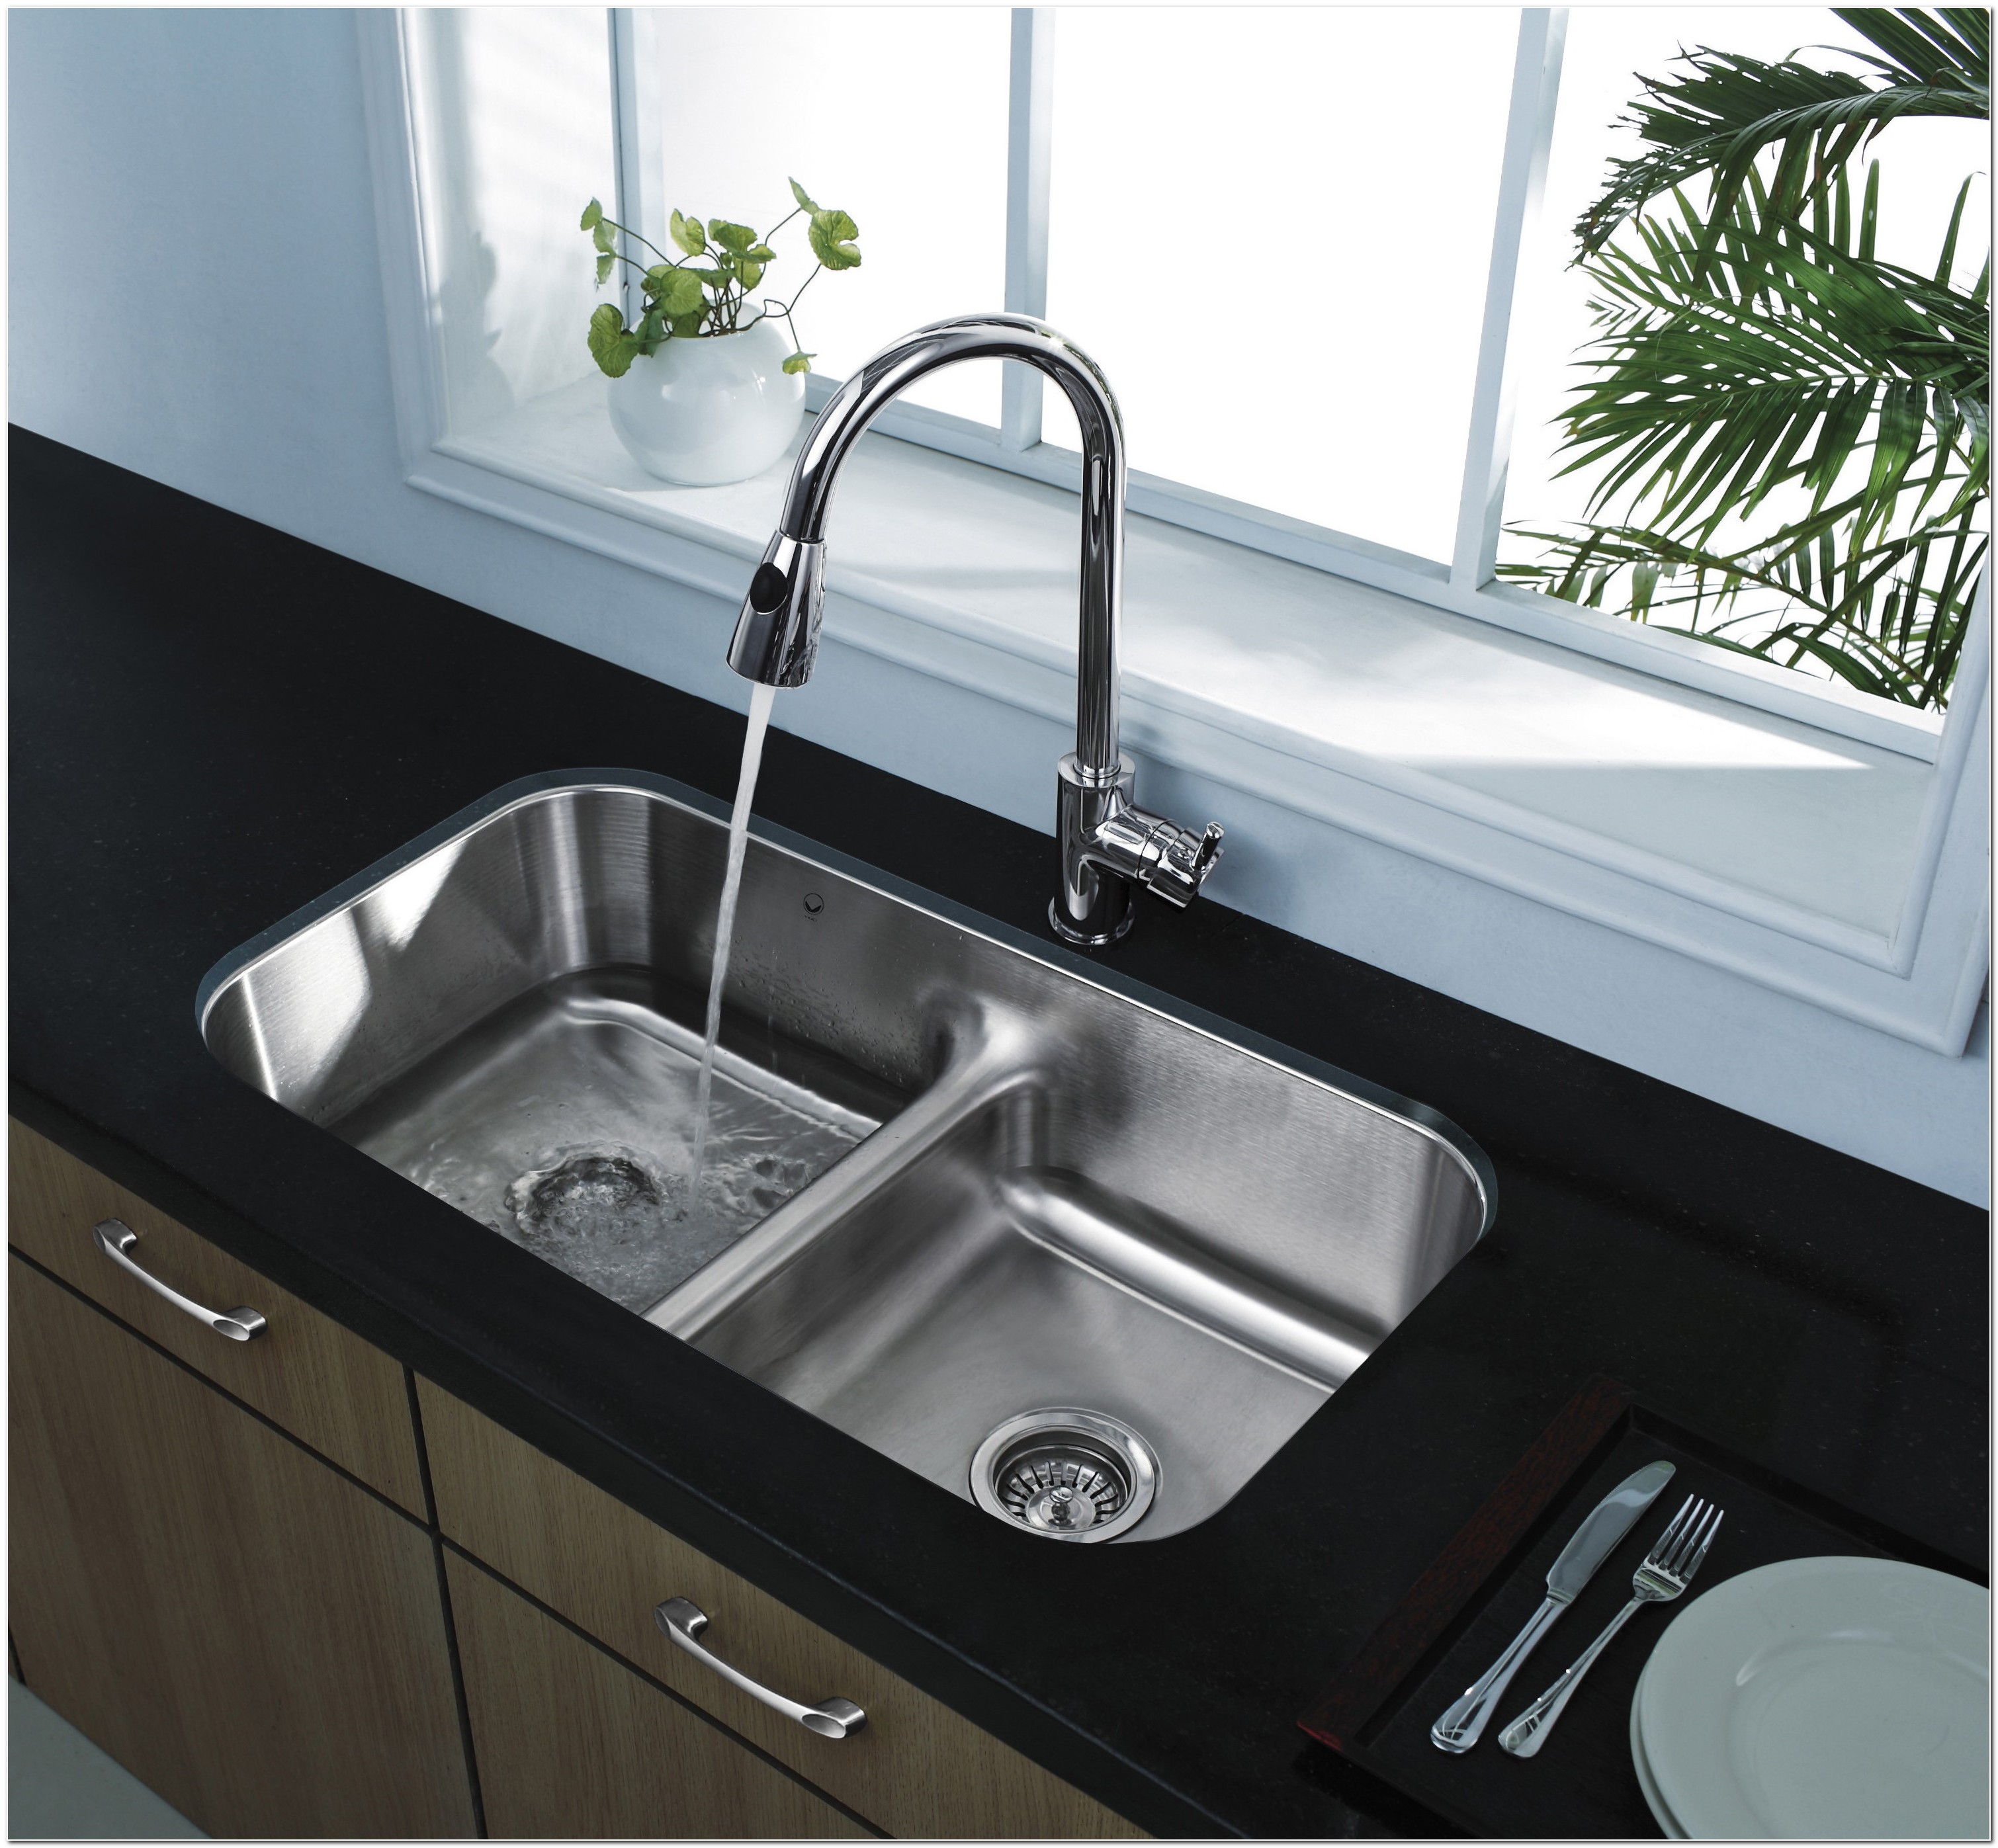 Black Porcelain Undermount Kitchen Sinks - Sink And Faucet : Home ...